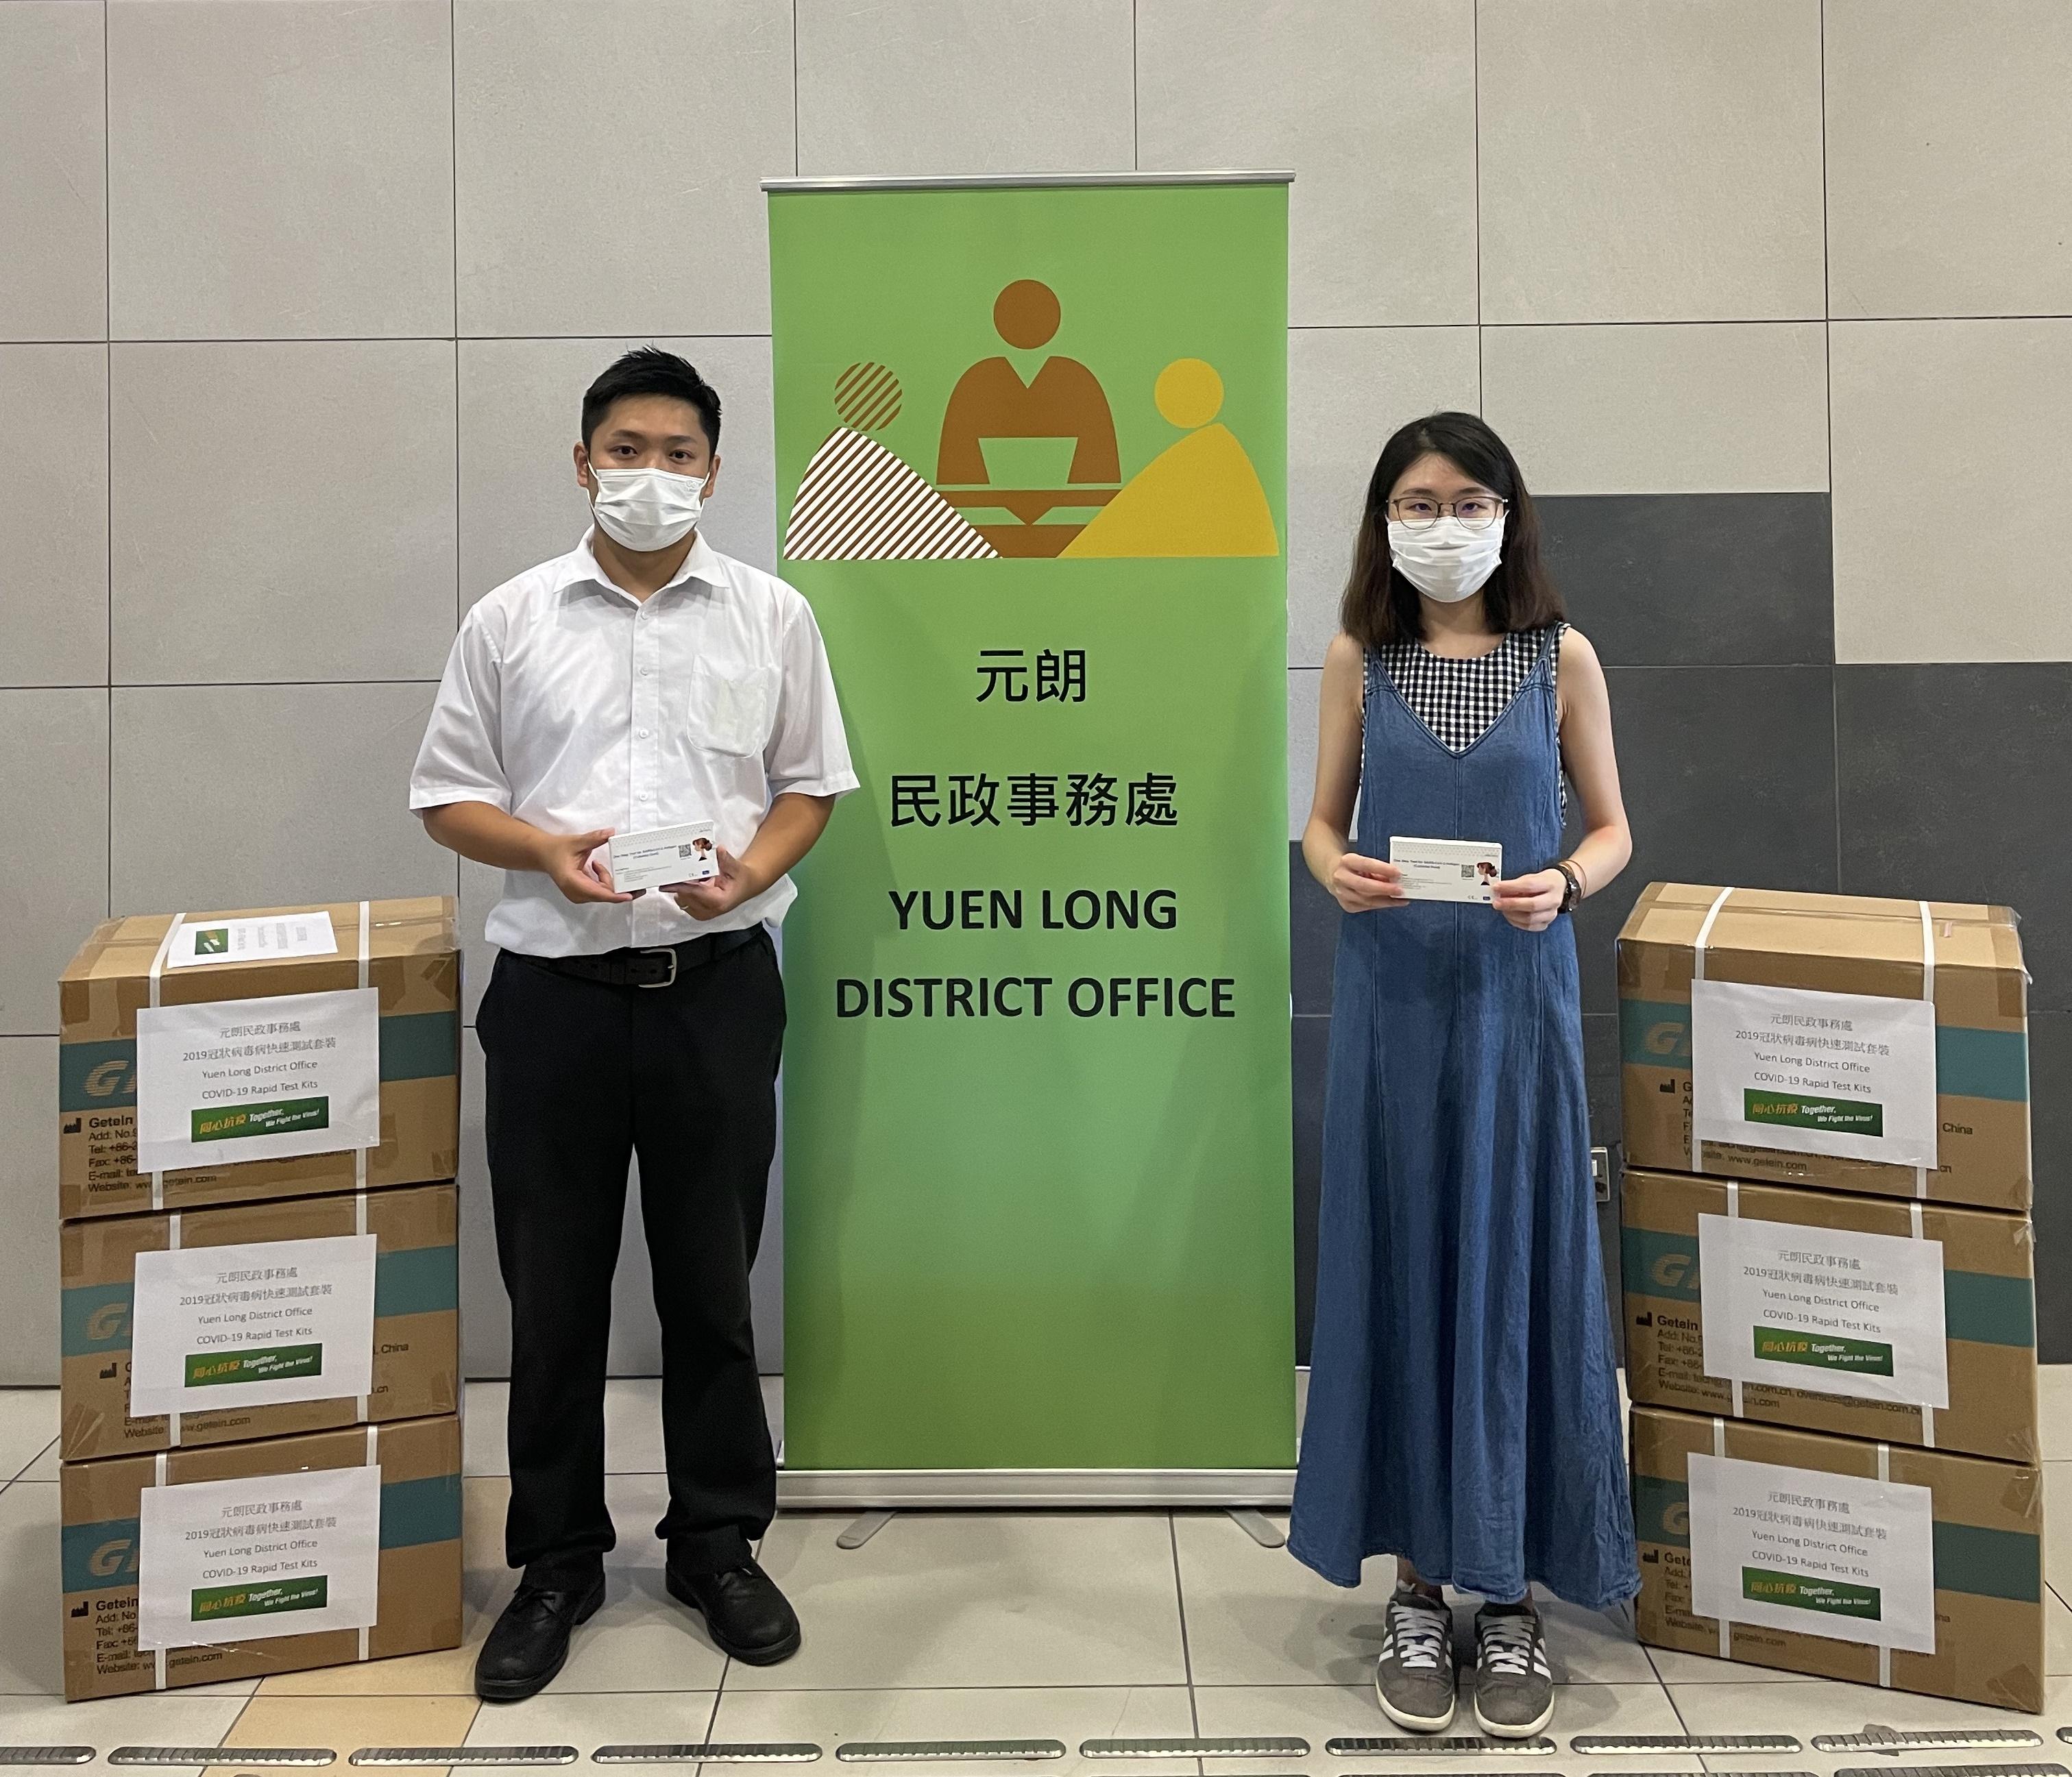 The Yuen Long District Office today (July 26) distributed COVID-19 rapid test kits to households, cleansing workers and property management staff living and working in Wetland Seasons Park for voluntary testing through the property management company.

